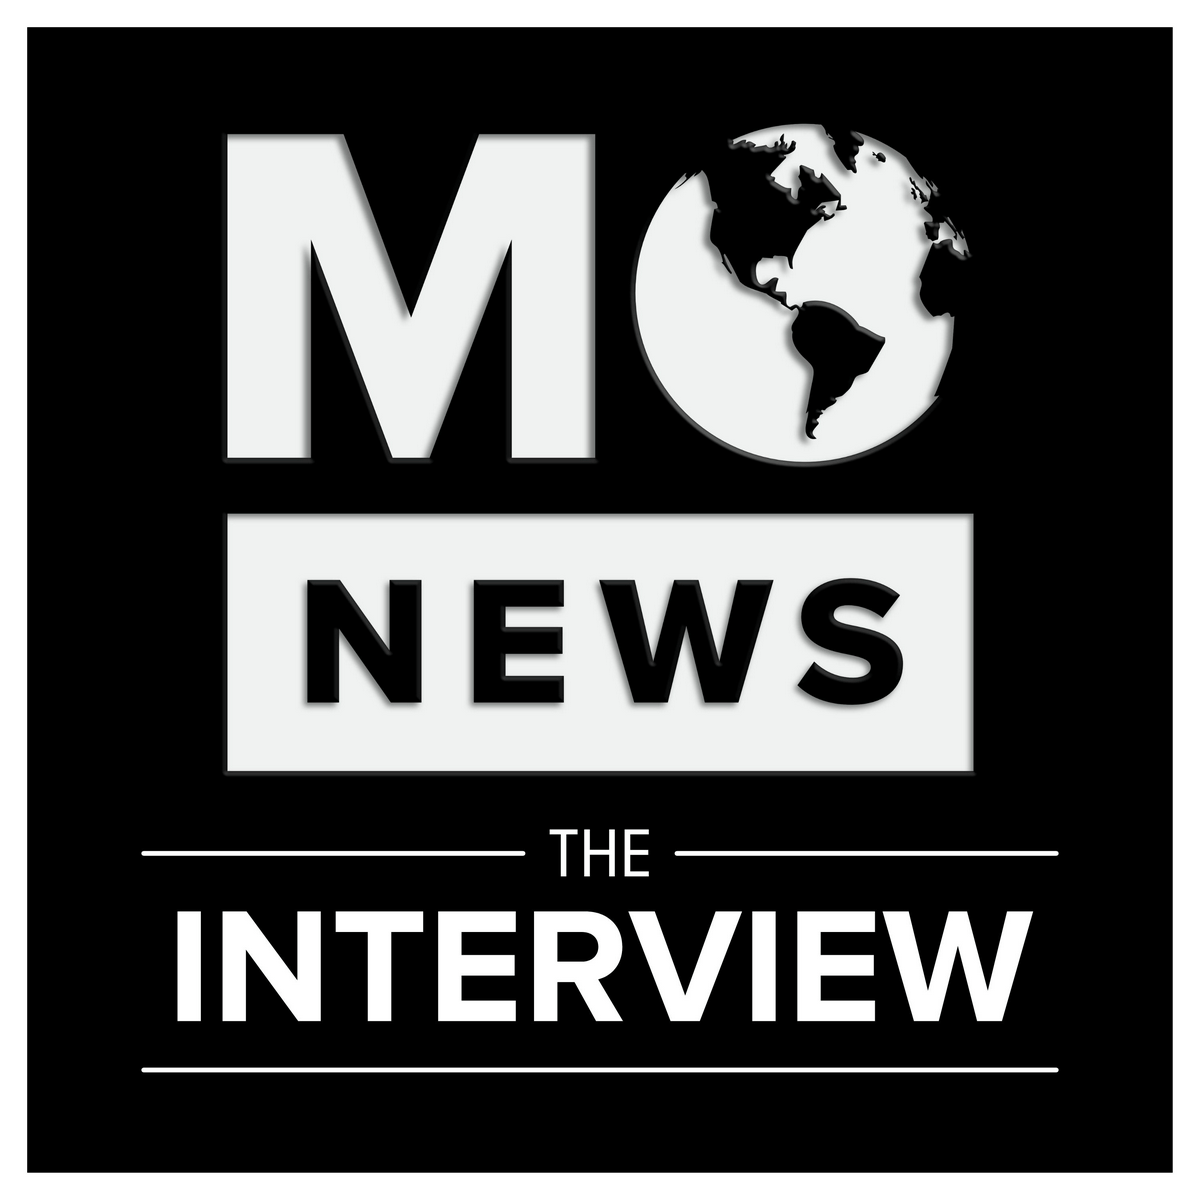 Mo News The Interview black and white logo